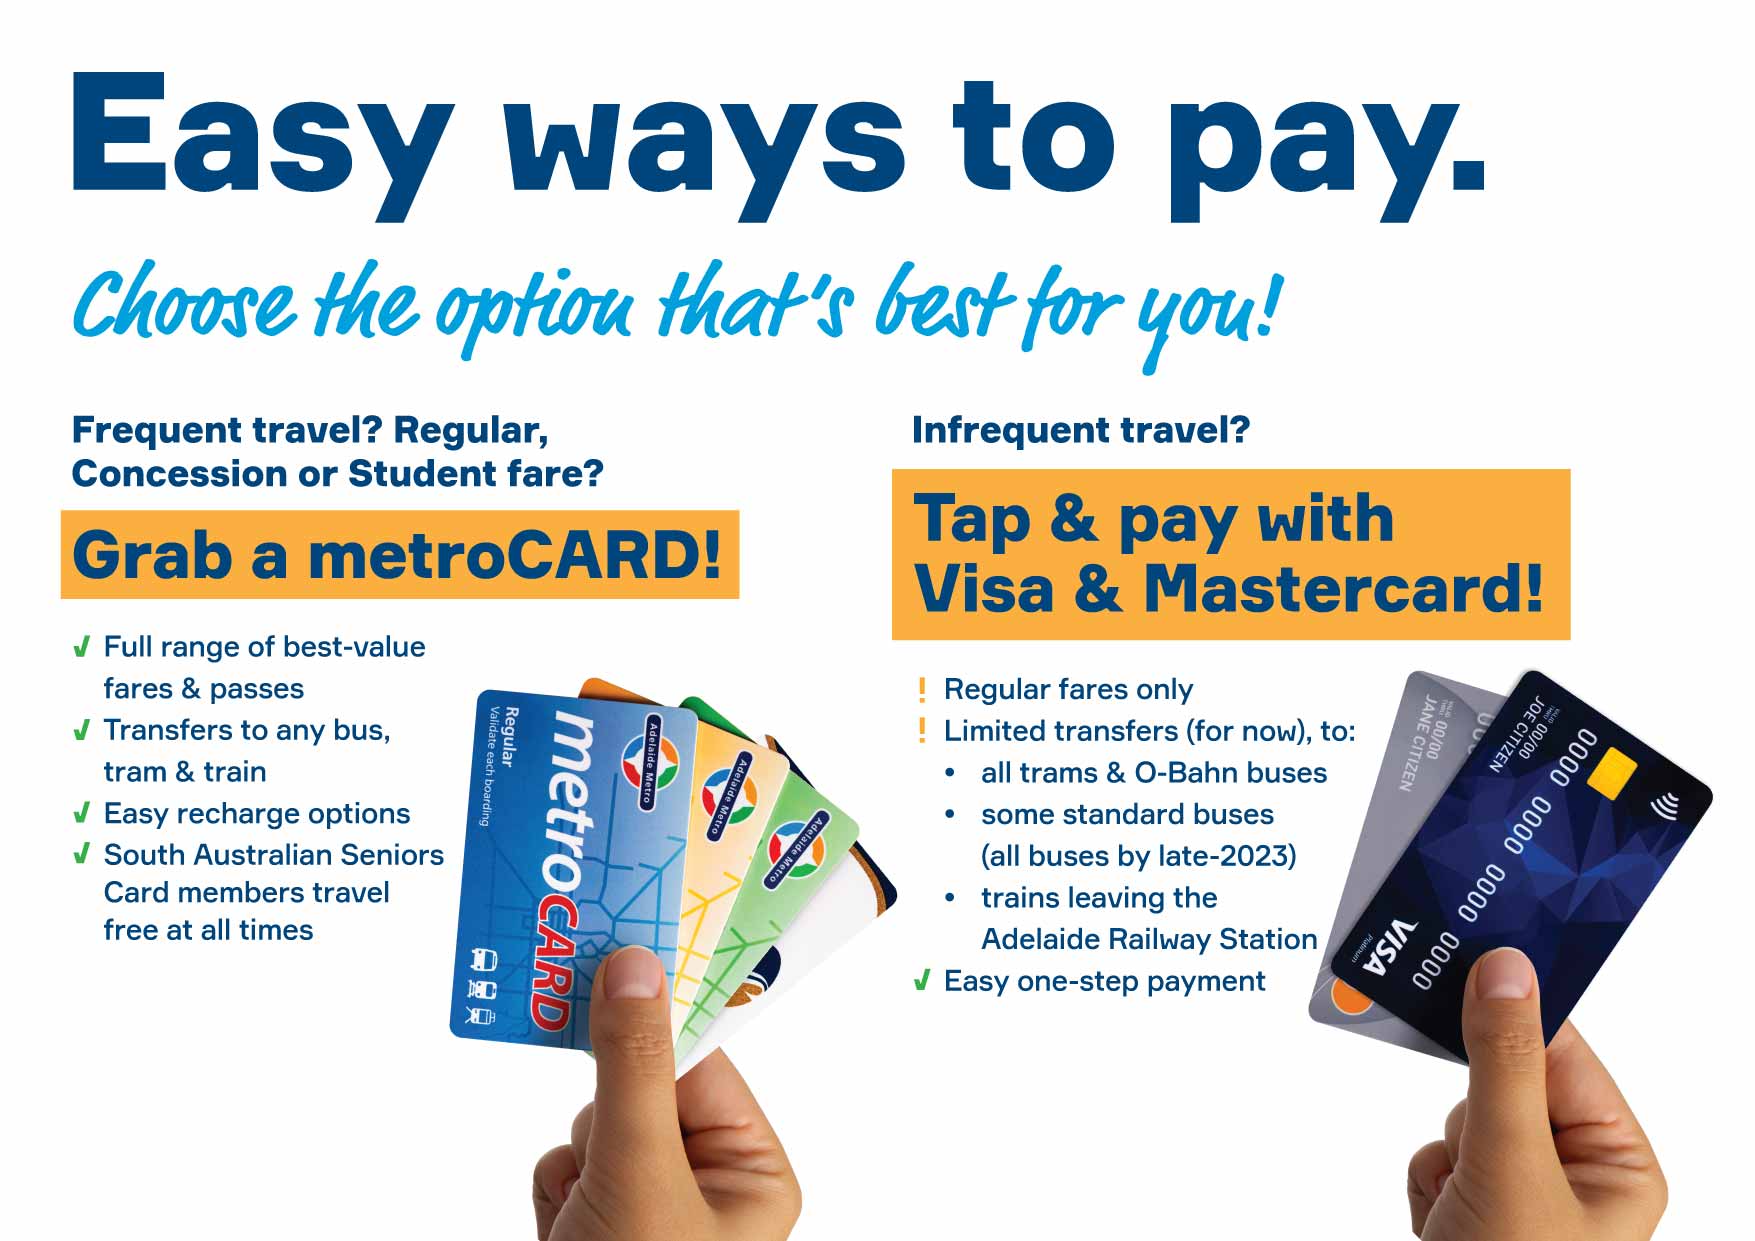 Poster: Easy ways to pay. Next to an image showing a hand holding all metroCARDS (Regular, Student, Concession and Seniors Card) is the text: Frequent travel? Regular, Concession or Student fare? Grab a metroCARD: Full range of best-value fares and passes; Transfers to any bus, tram or train; Easy recharge options; South Australian Seniors Card members travel free at all times. Next to an image of a hand holding a Visa card and Mastercard is the text: Infrequent travel? Tap and pay with Visa and Mastercard. Regular fares only; Limited transfers (for now) to all trams and O-Bahn buses, some standard buses (all buses by mid-2023), trains leaving the Adelaide Railway Station; Easy one-step payment.